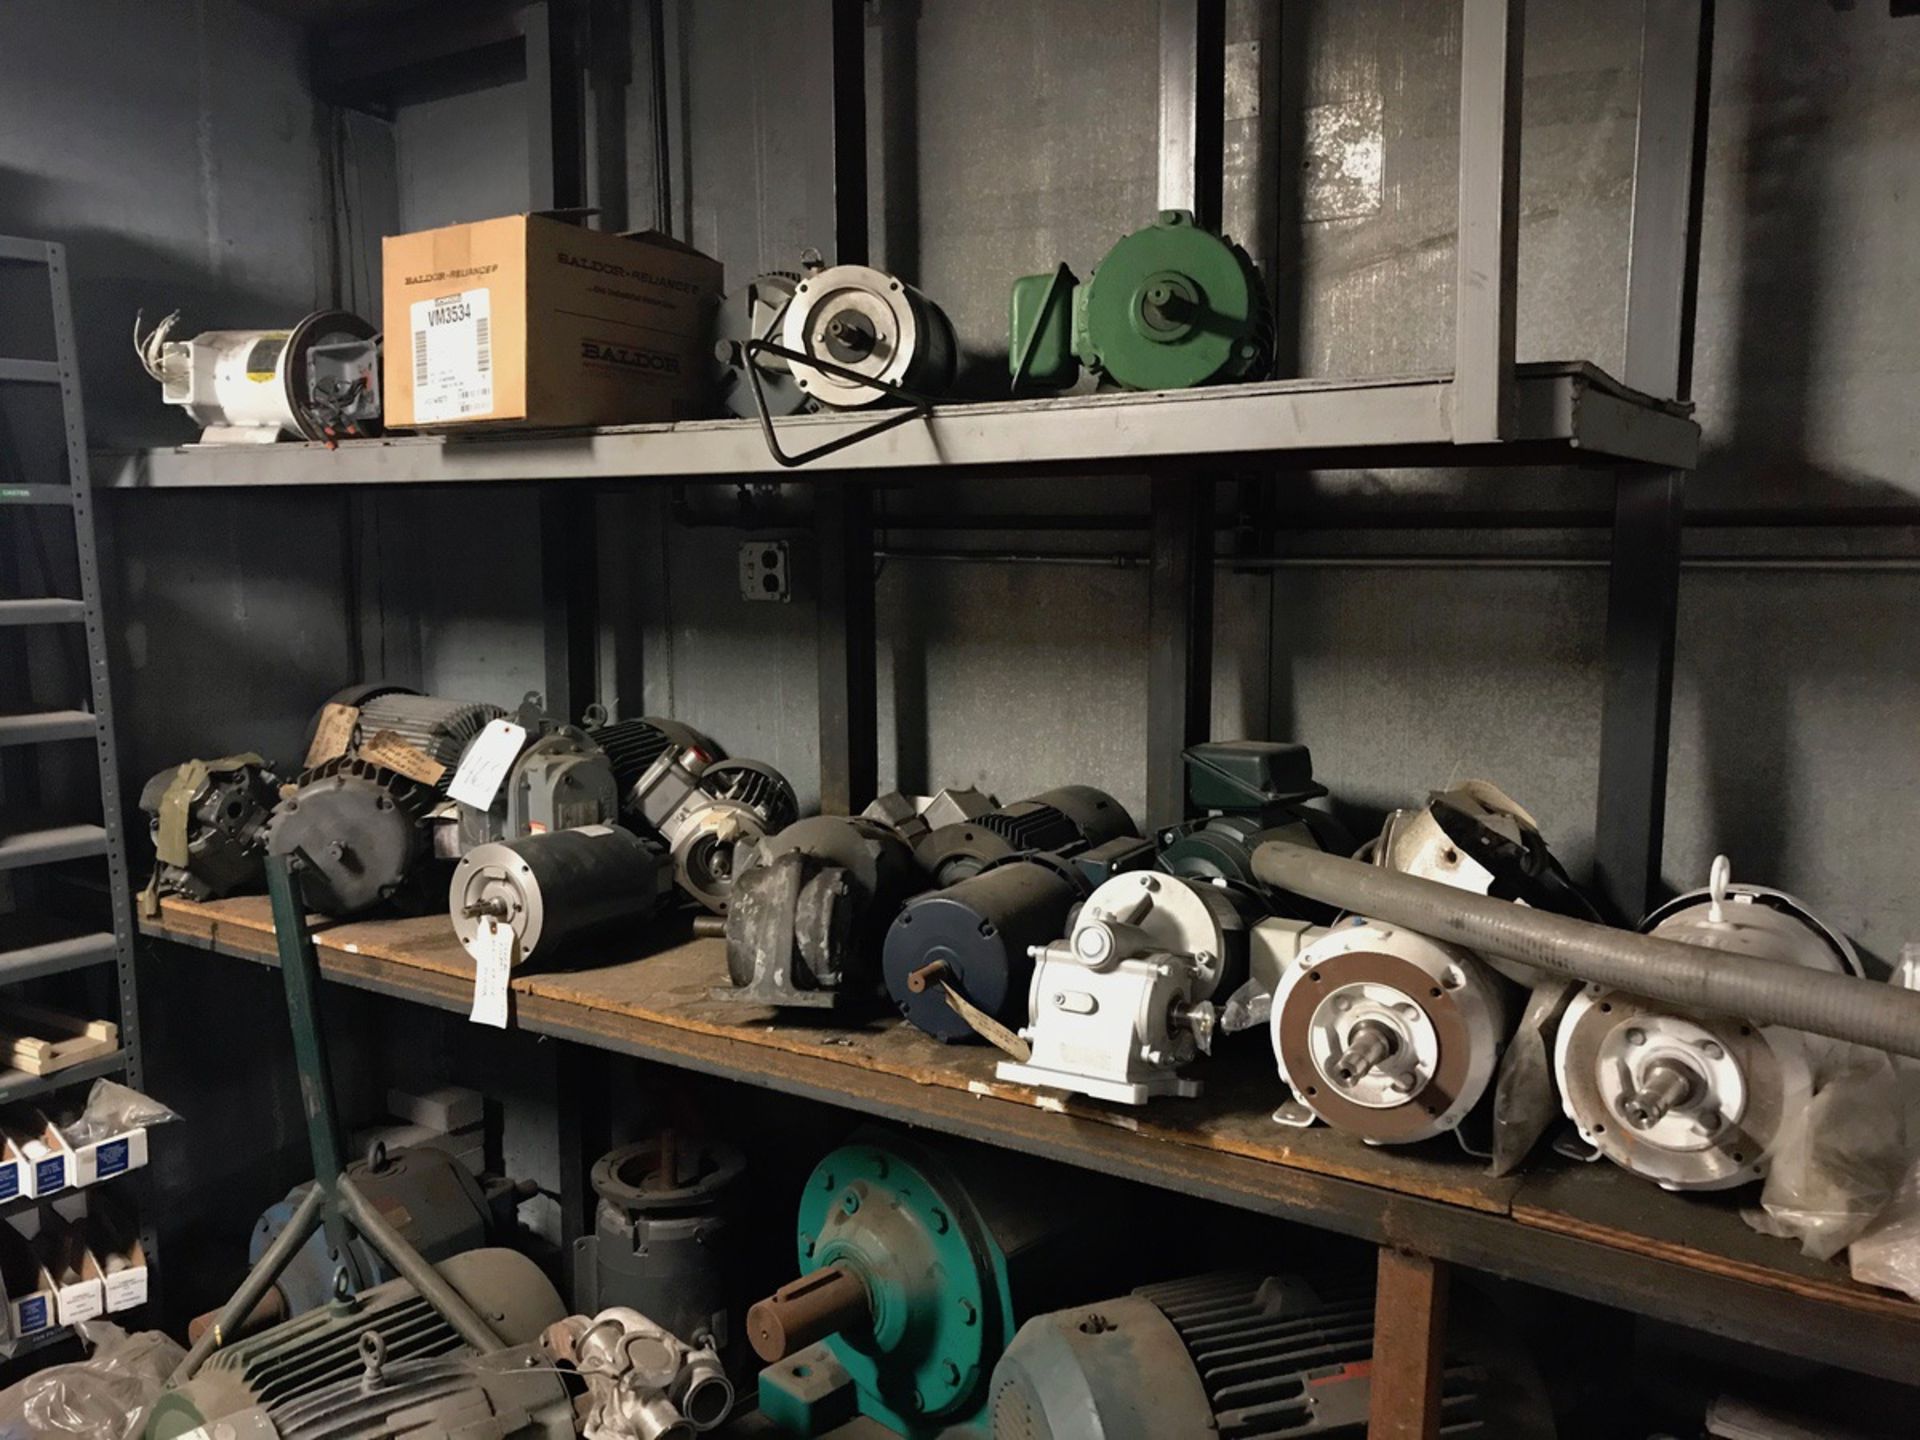 Approx 30 Motors and Gear Boxes | Loc: Erie PA | Rig Fee: $250